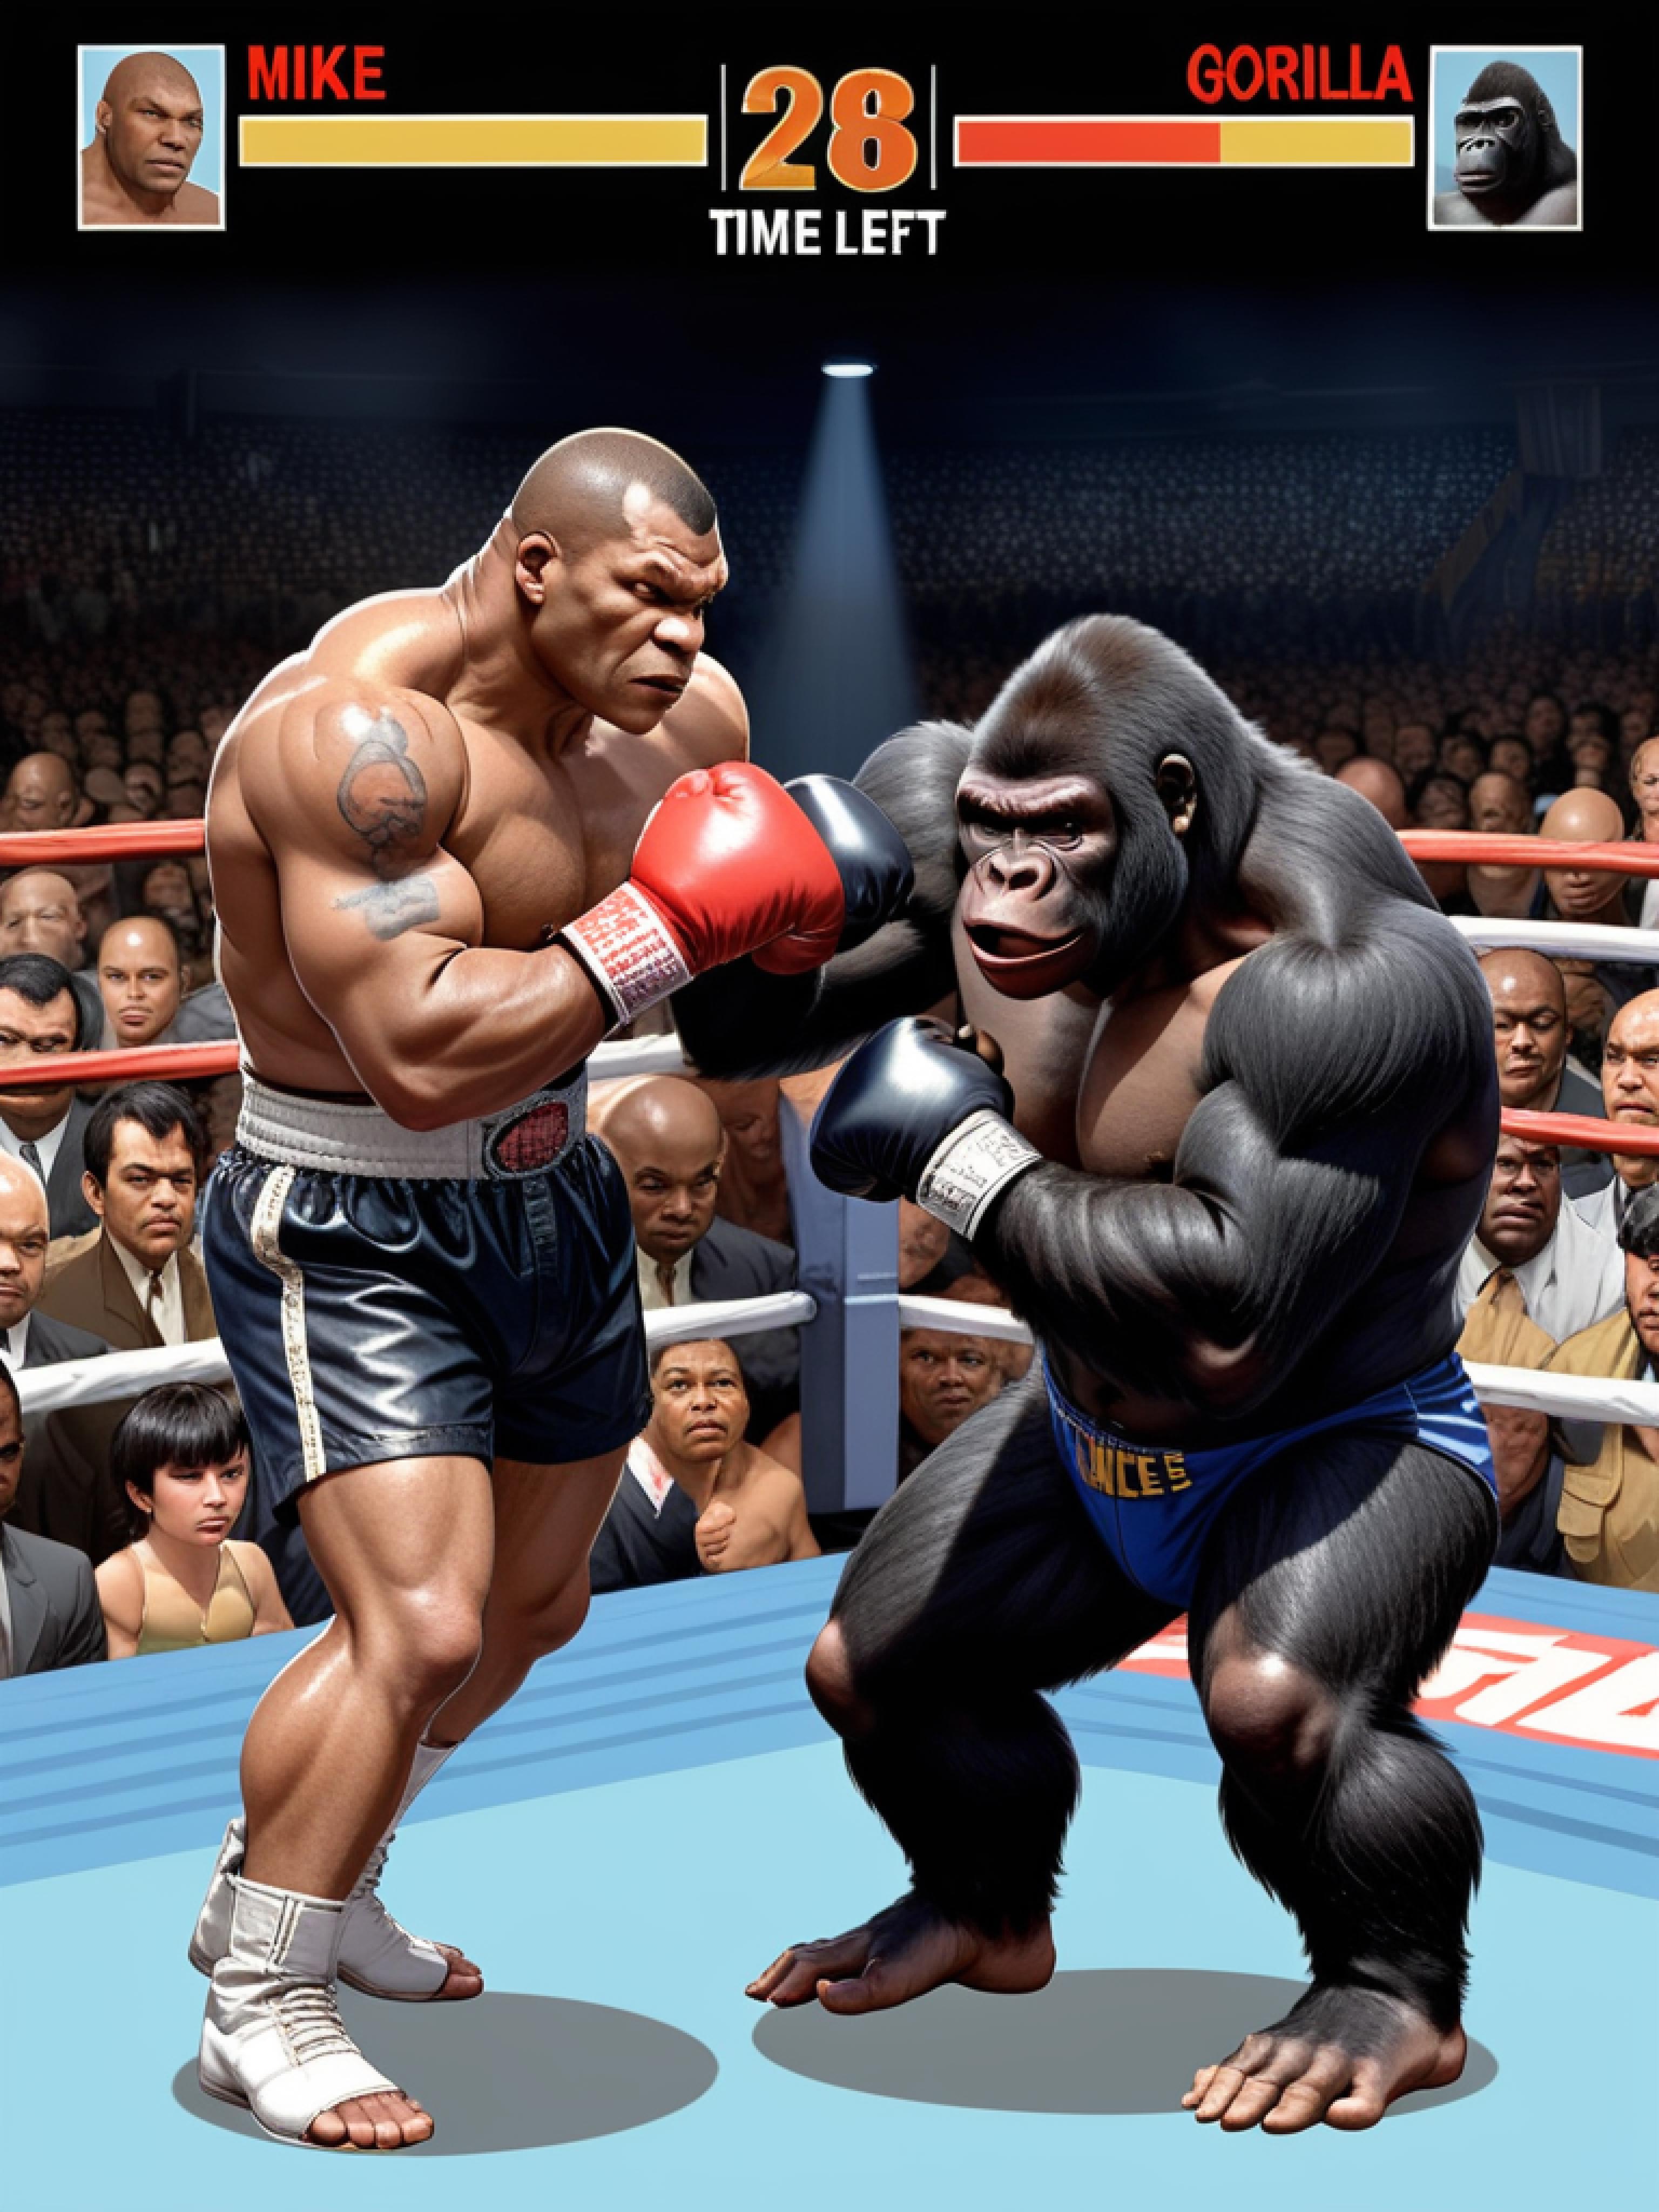 Animated Boxing Match: Man vs. Gorilla in a Virtual Ring